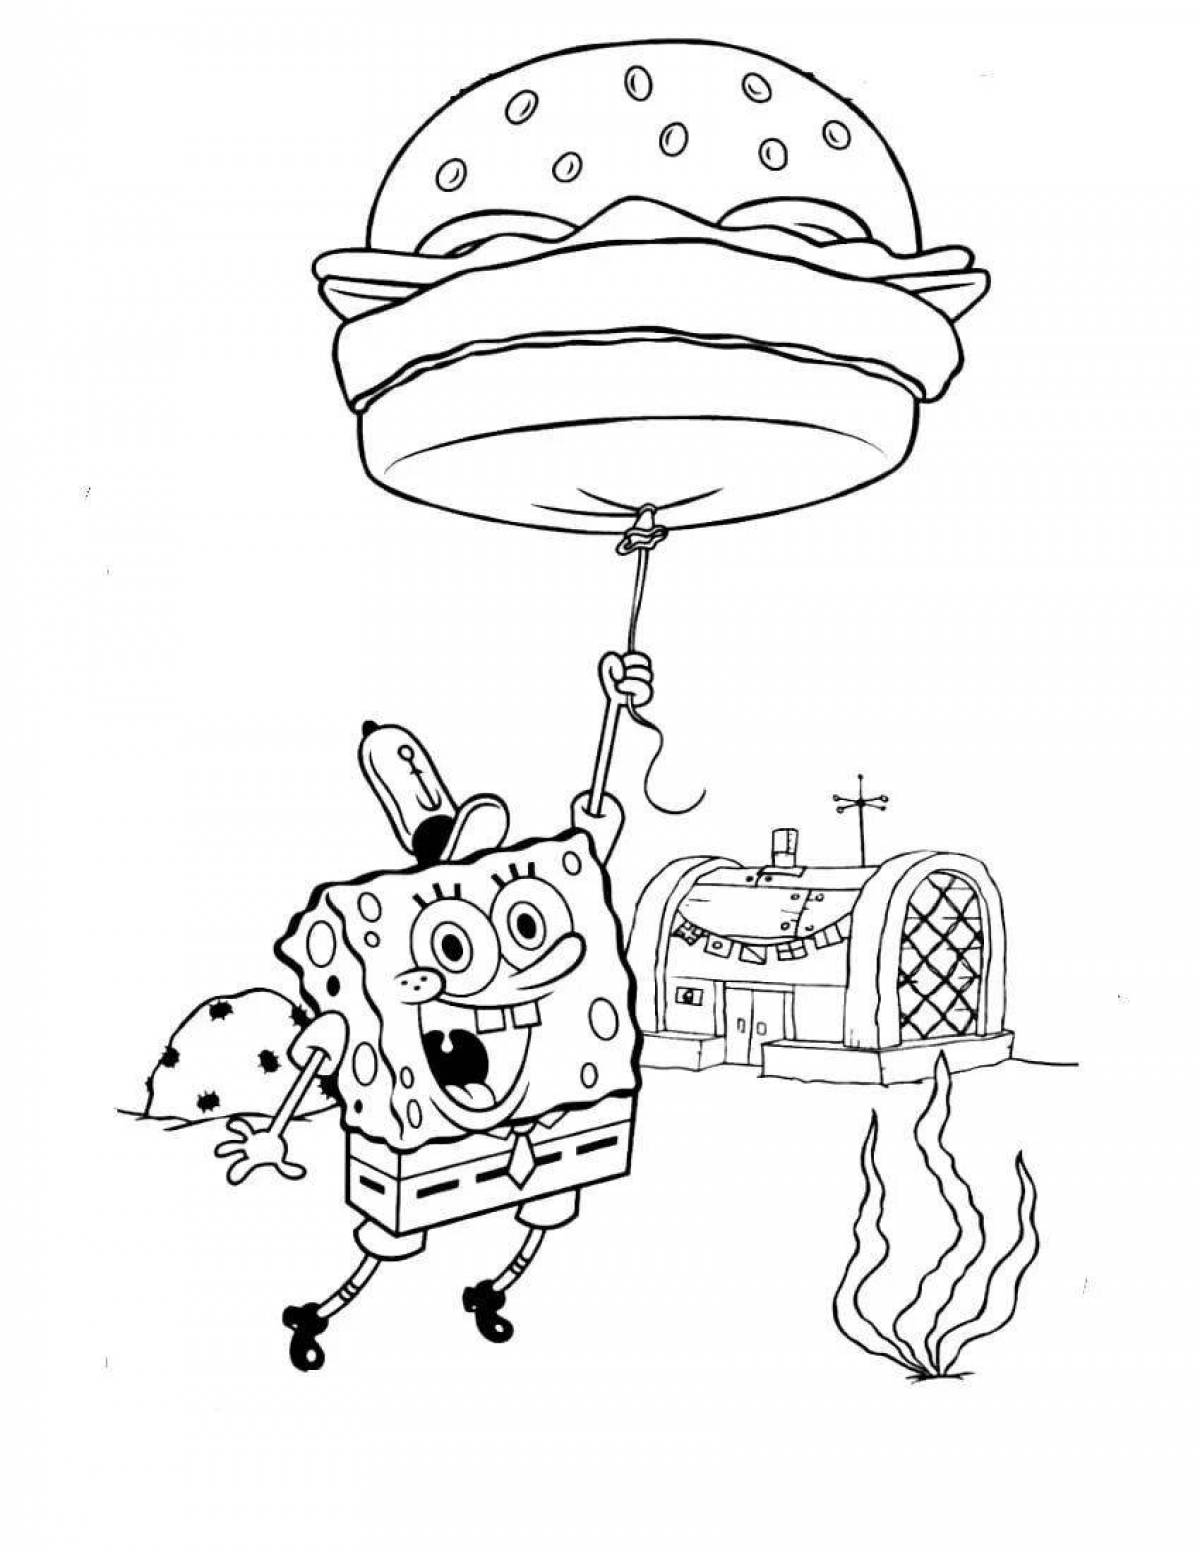 Spongebob's playful house coloring page